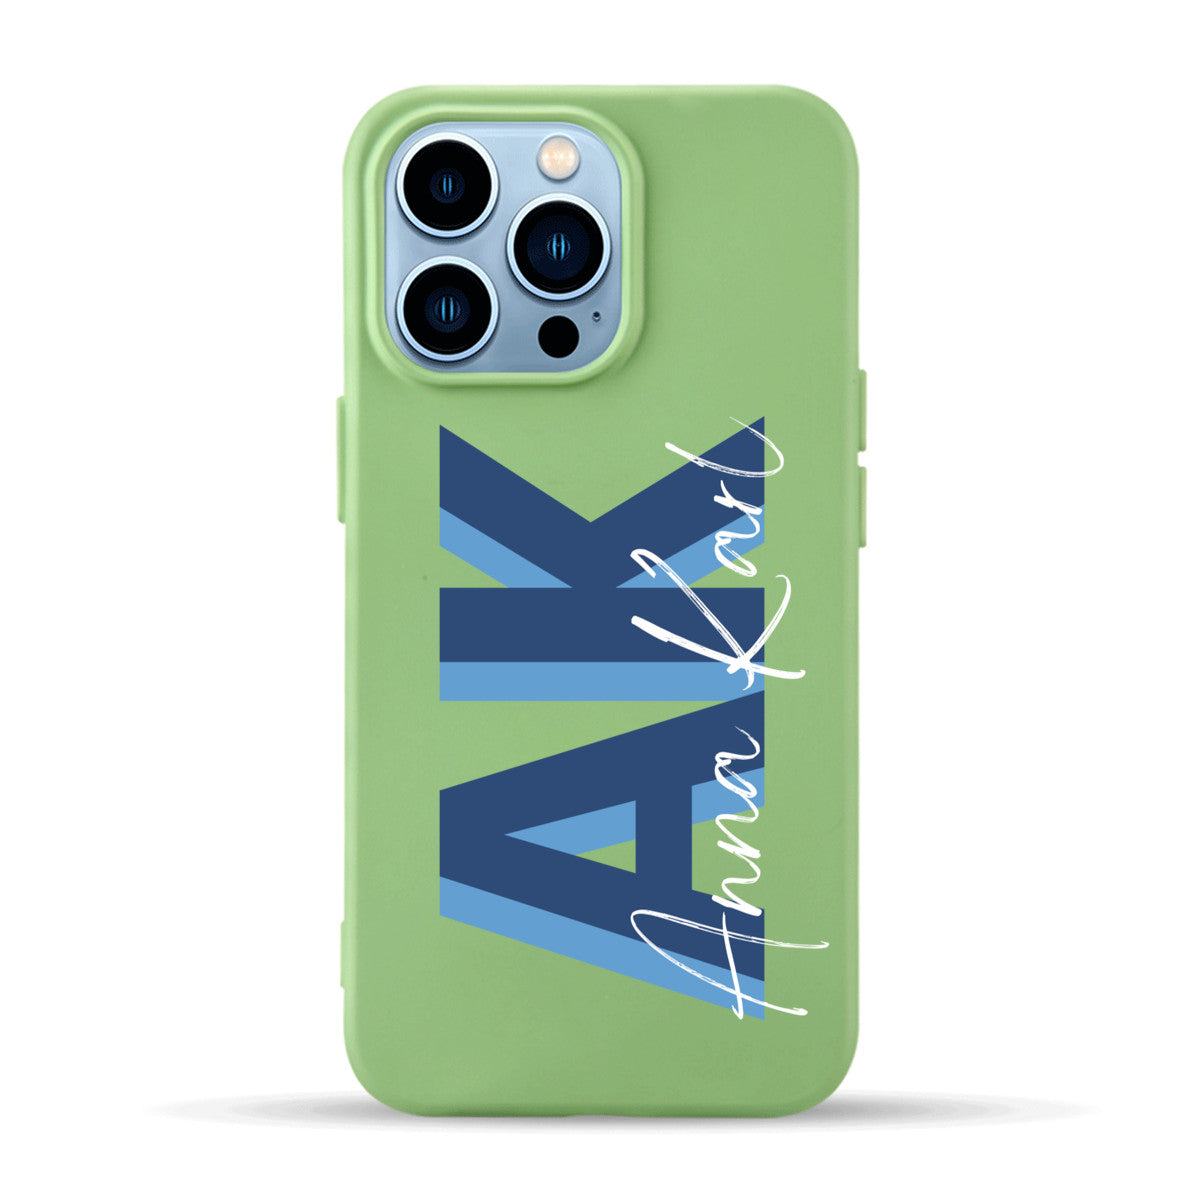 Personalized Name and Initials - iPhone Case